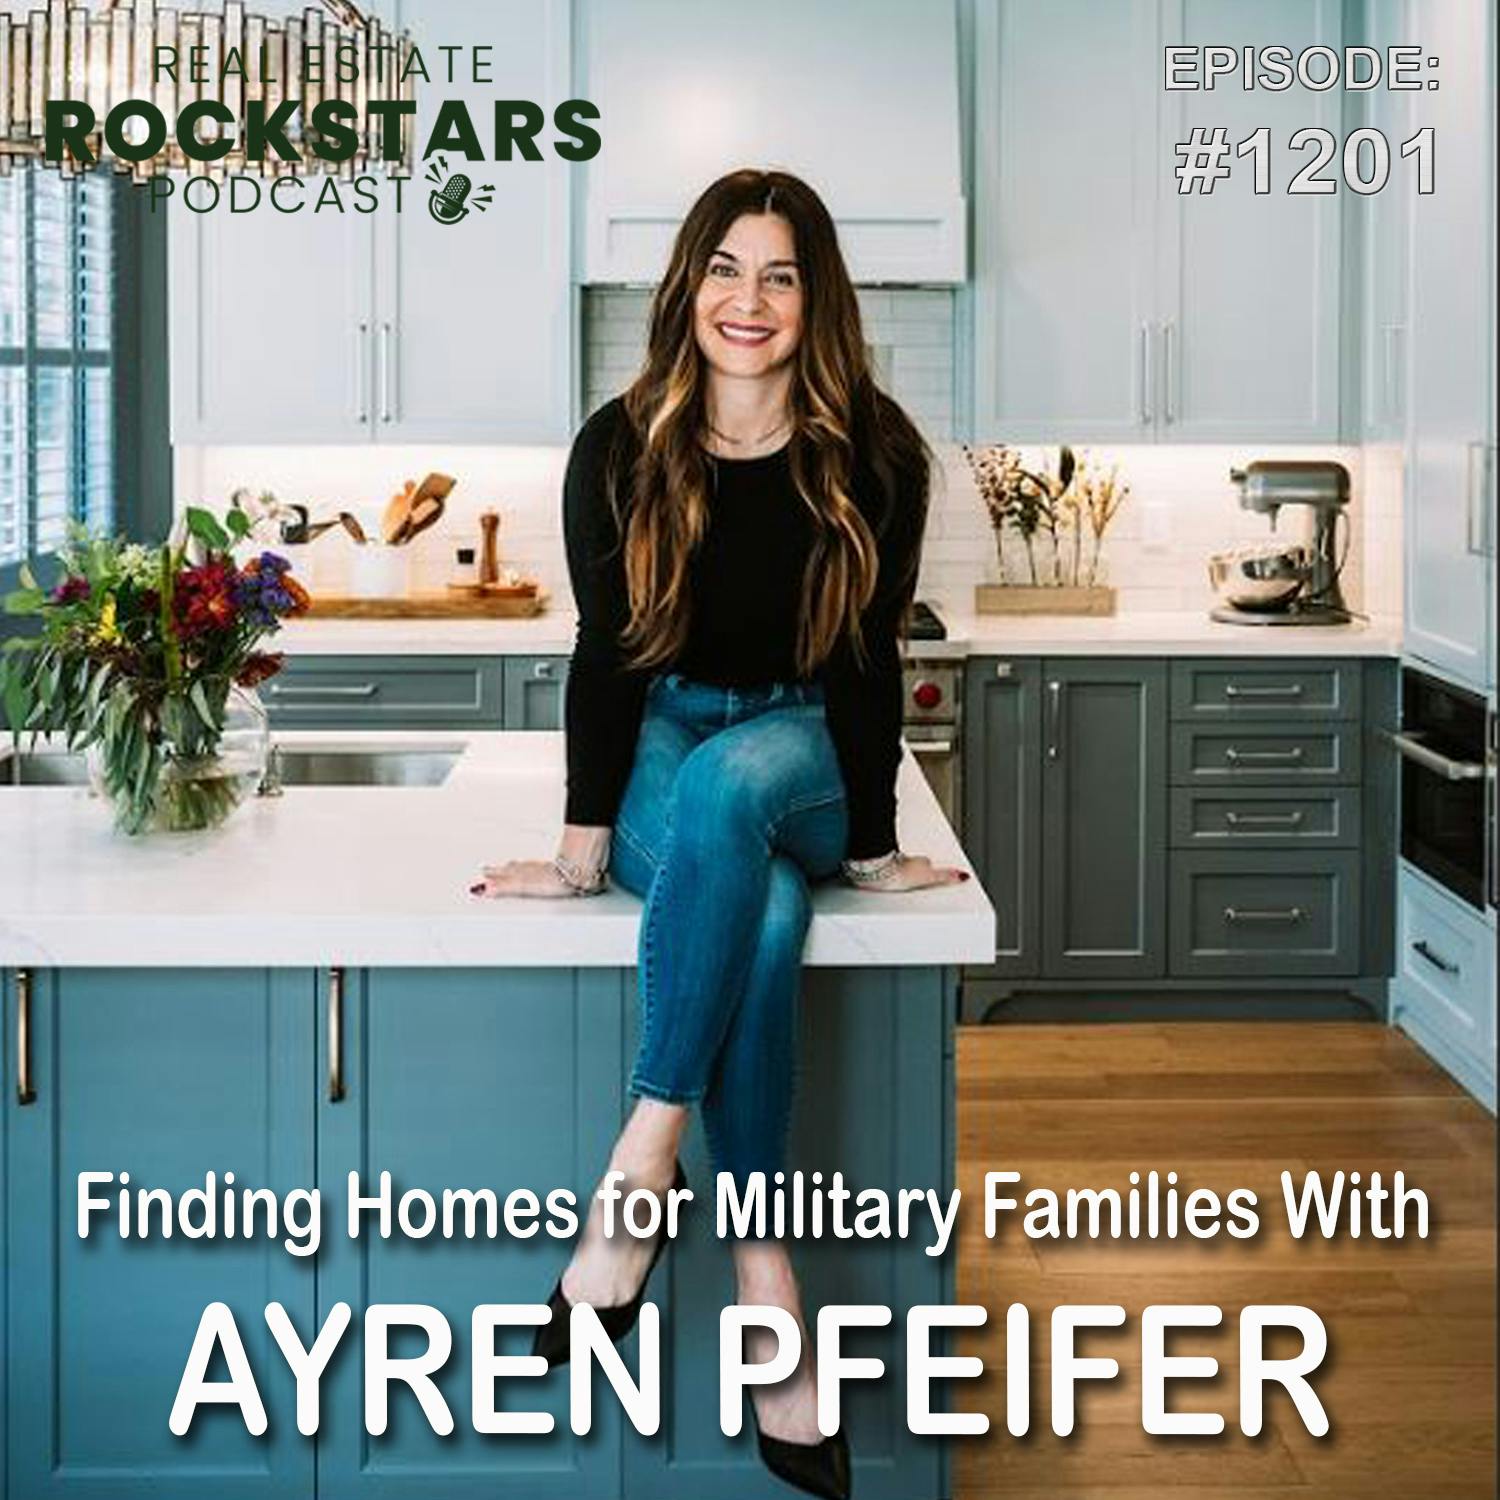 1201: Finding Homes for Military Families With Ayren Pfeifer